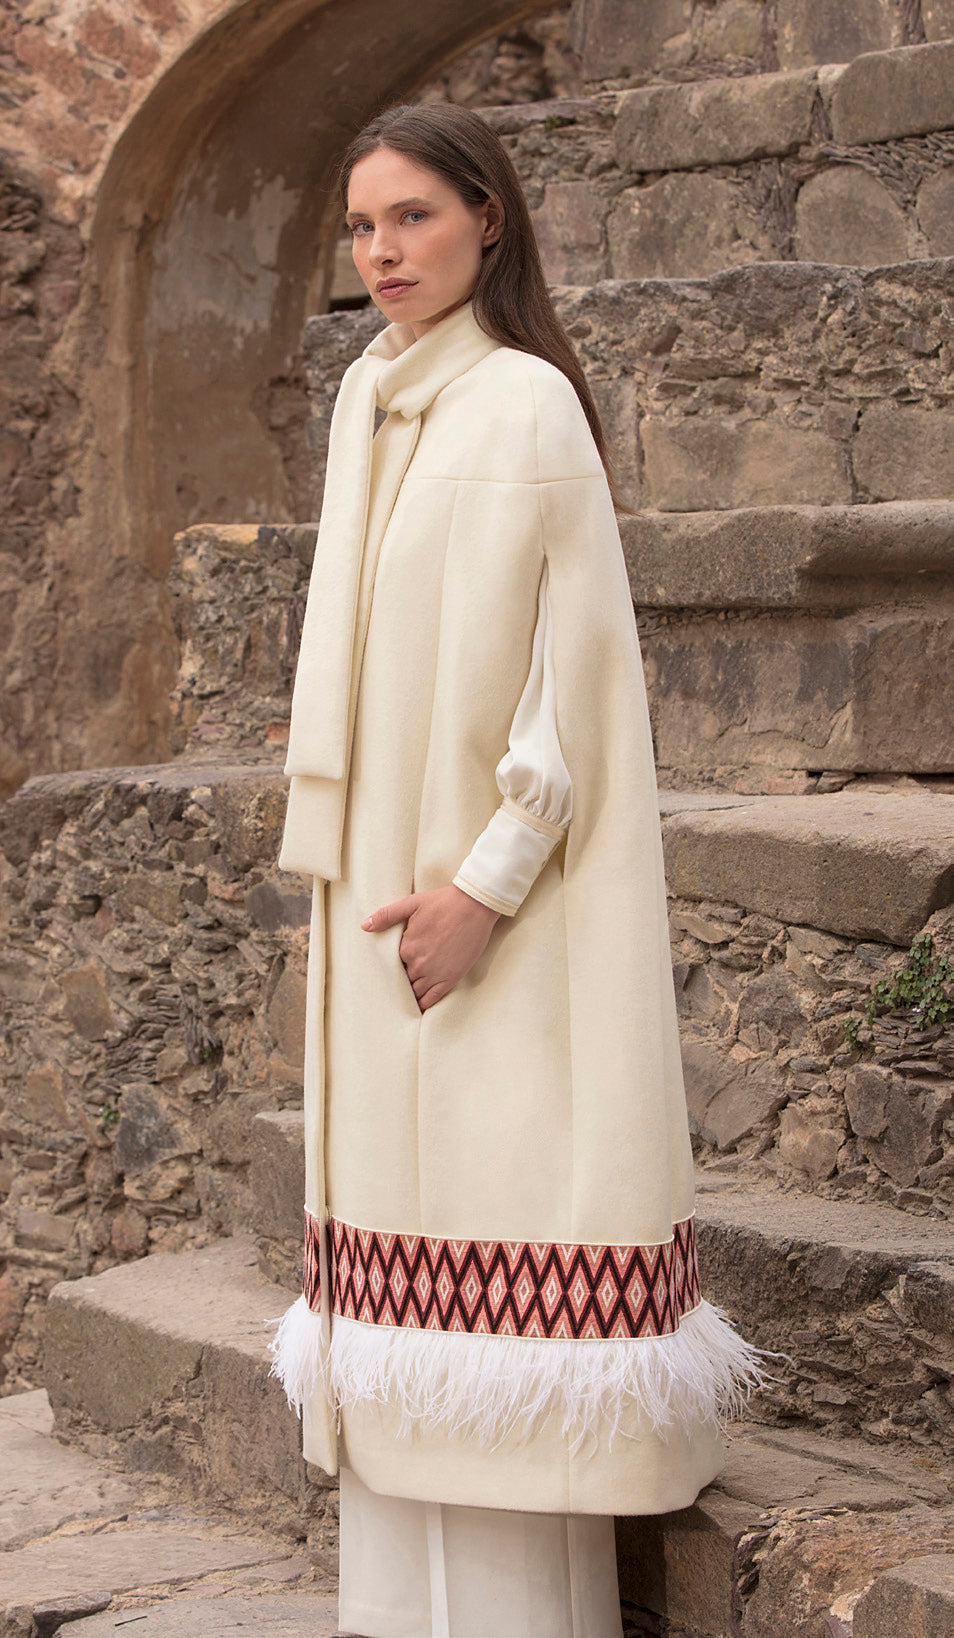 Elegant white coat with intricate stitched piece